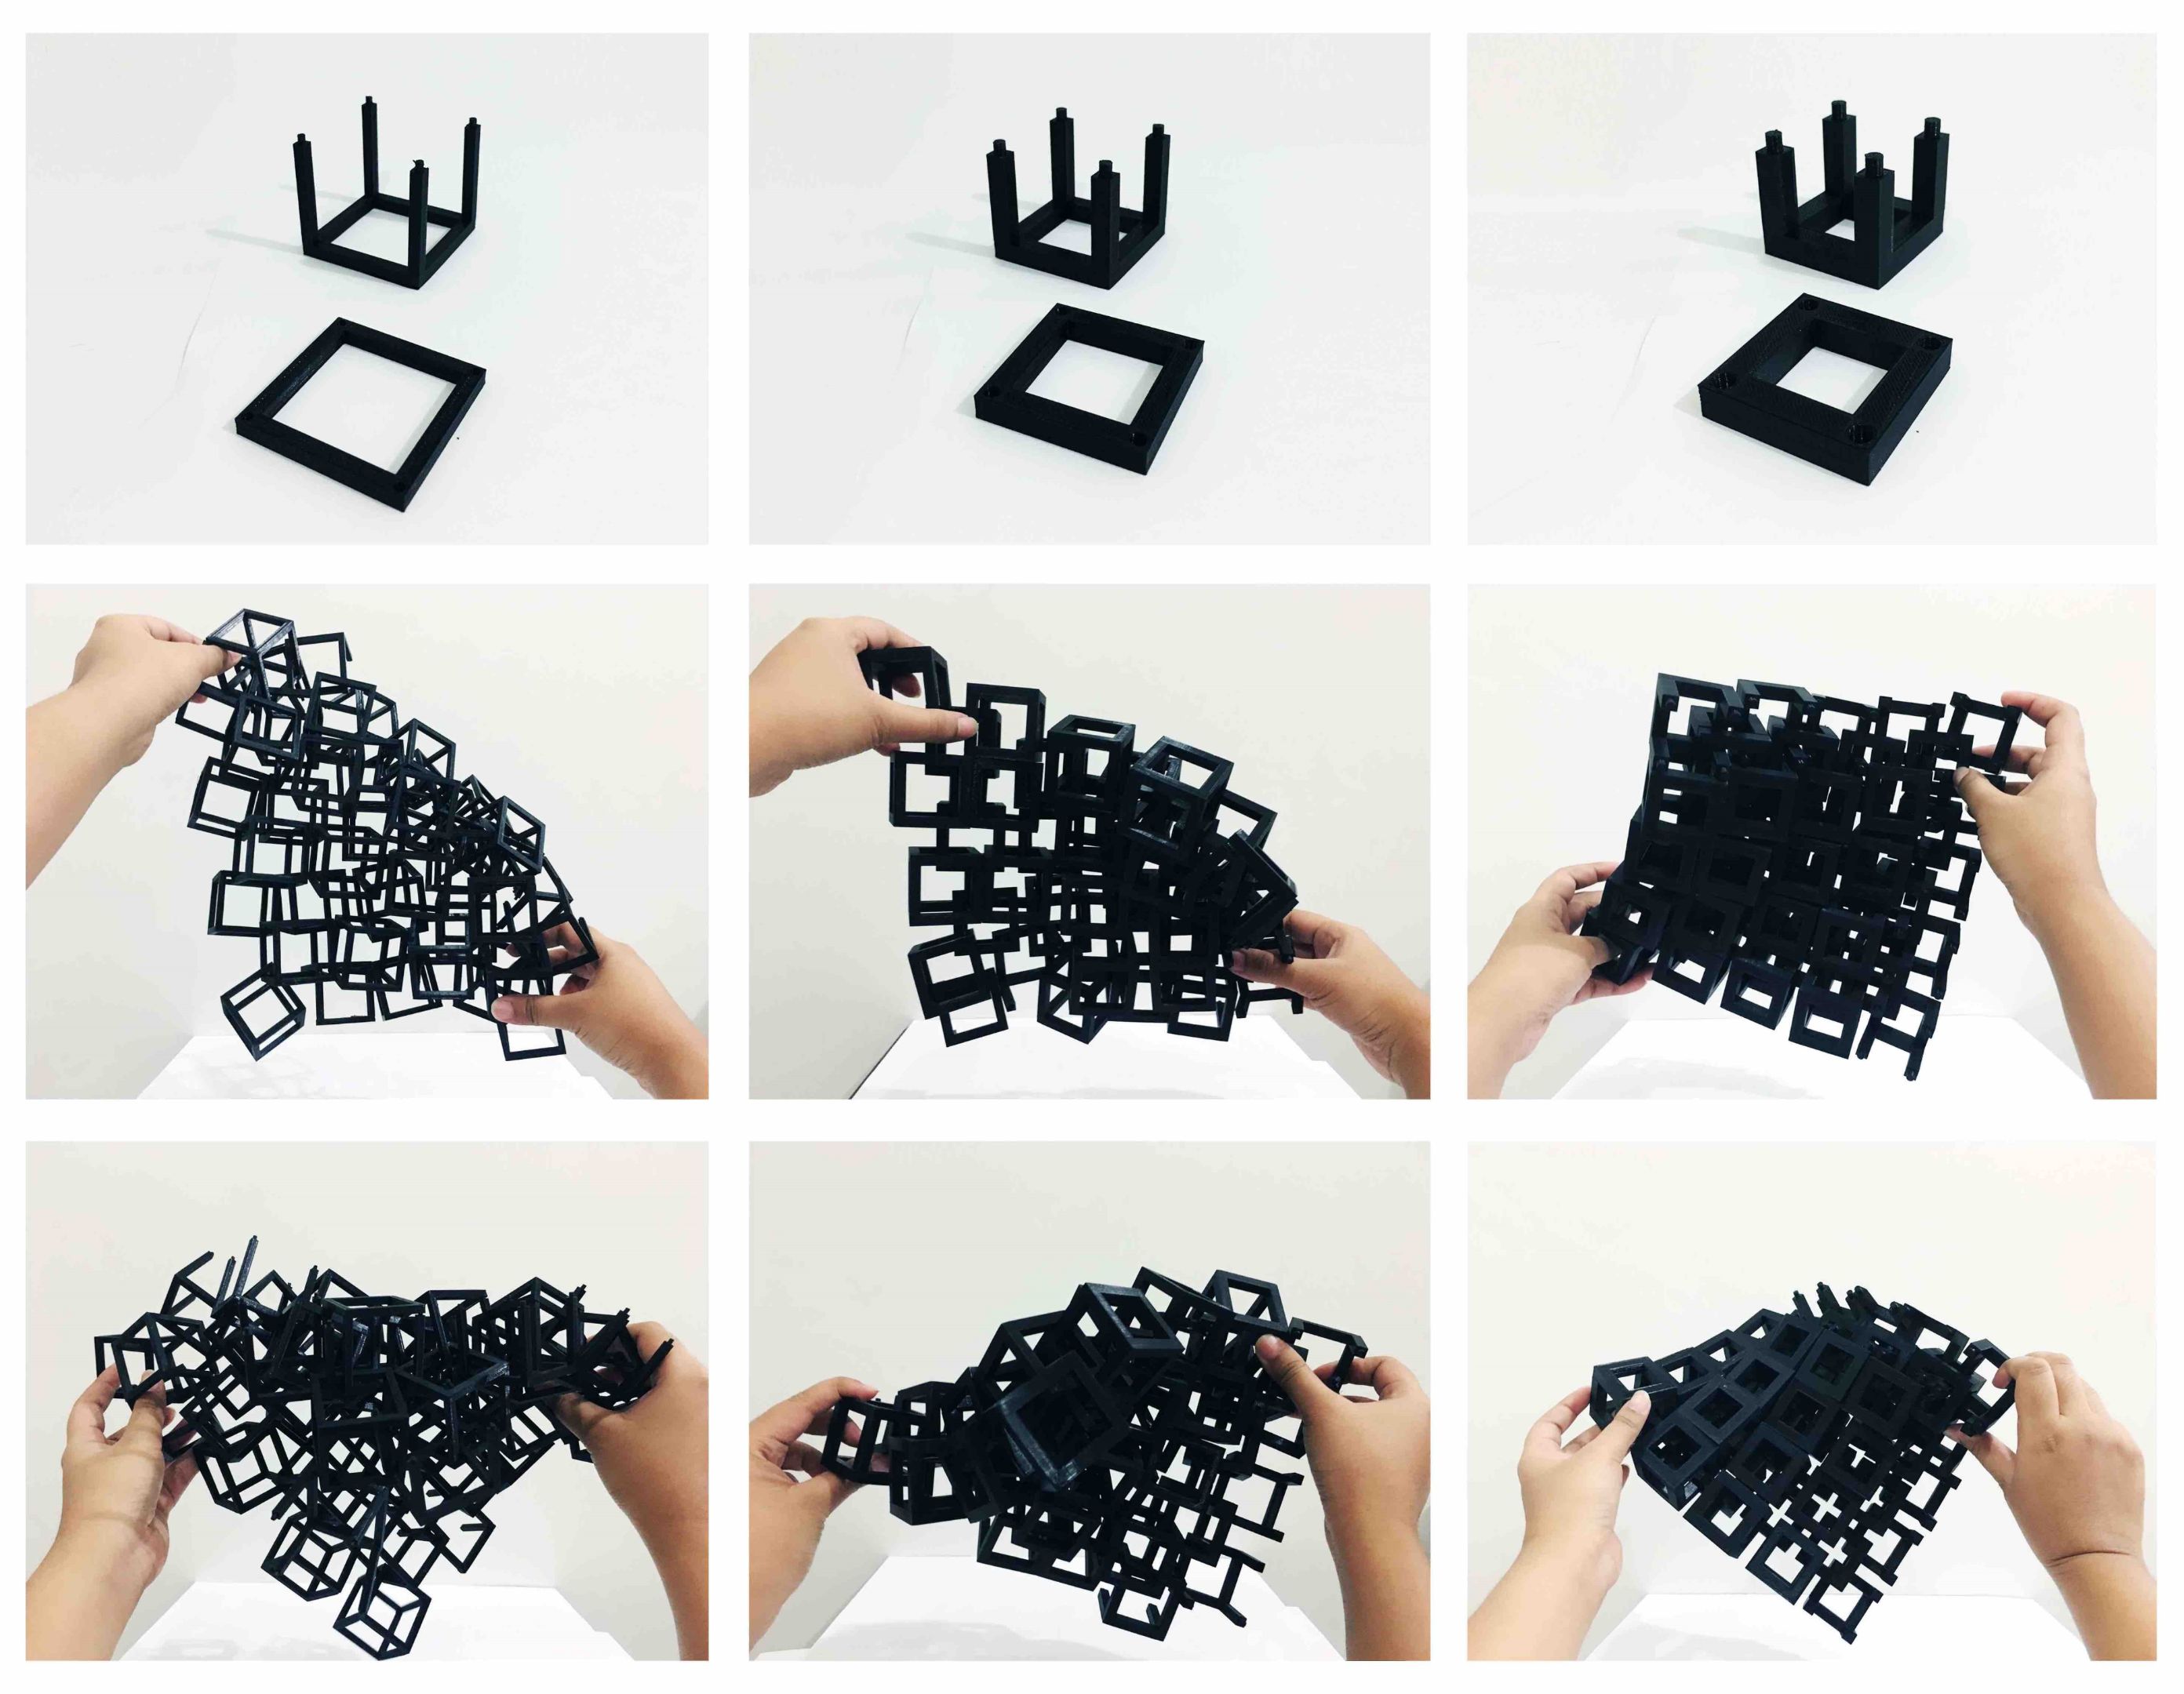 A grid of images showing a set of hands testing a system of interlocking cubes, 3d printed in different thick